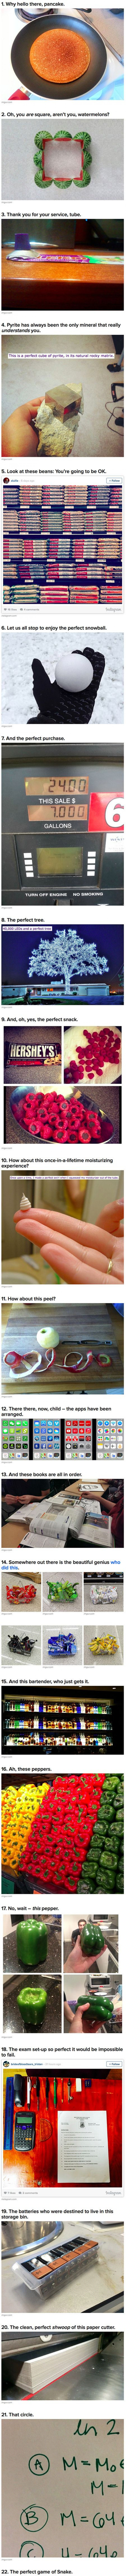 If You Are A Perfectionist You Will Love These 22 Pictures